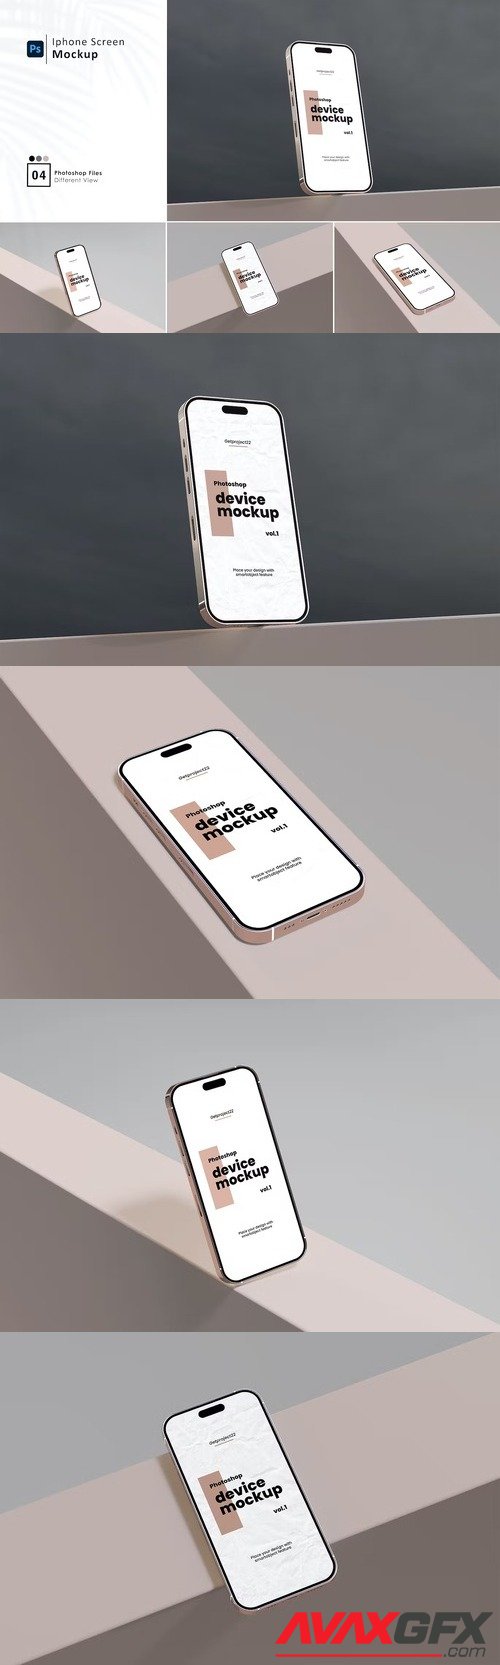 Perspective Iphone - Mockup [PSD]